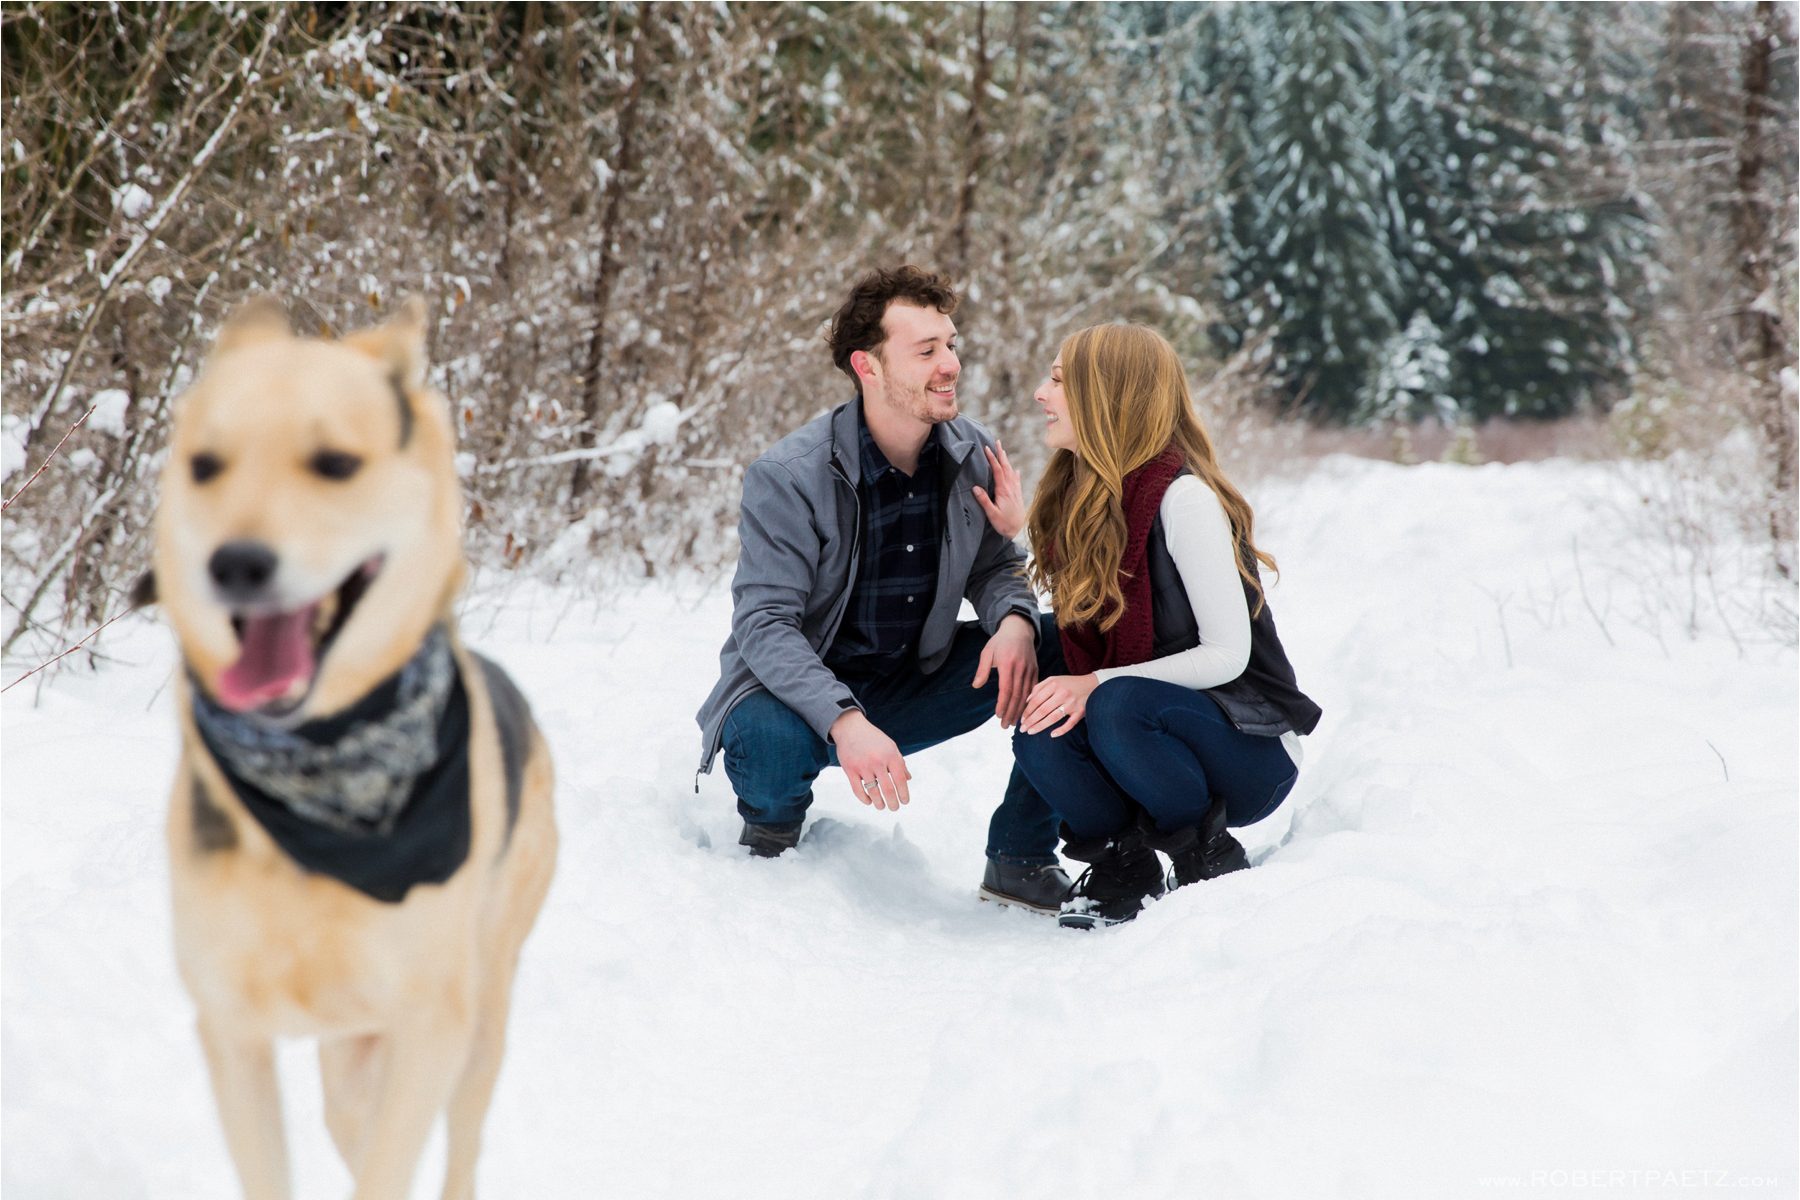 A Snoqualmie engagement photography session in the snow outside of Seattle, Washington, photographed by the destination wedding photographer Robert Paetz. 